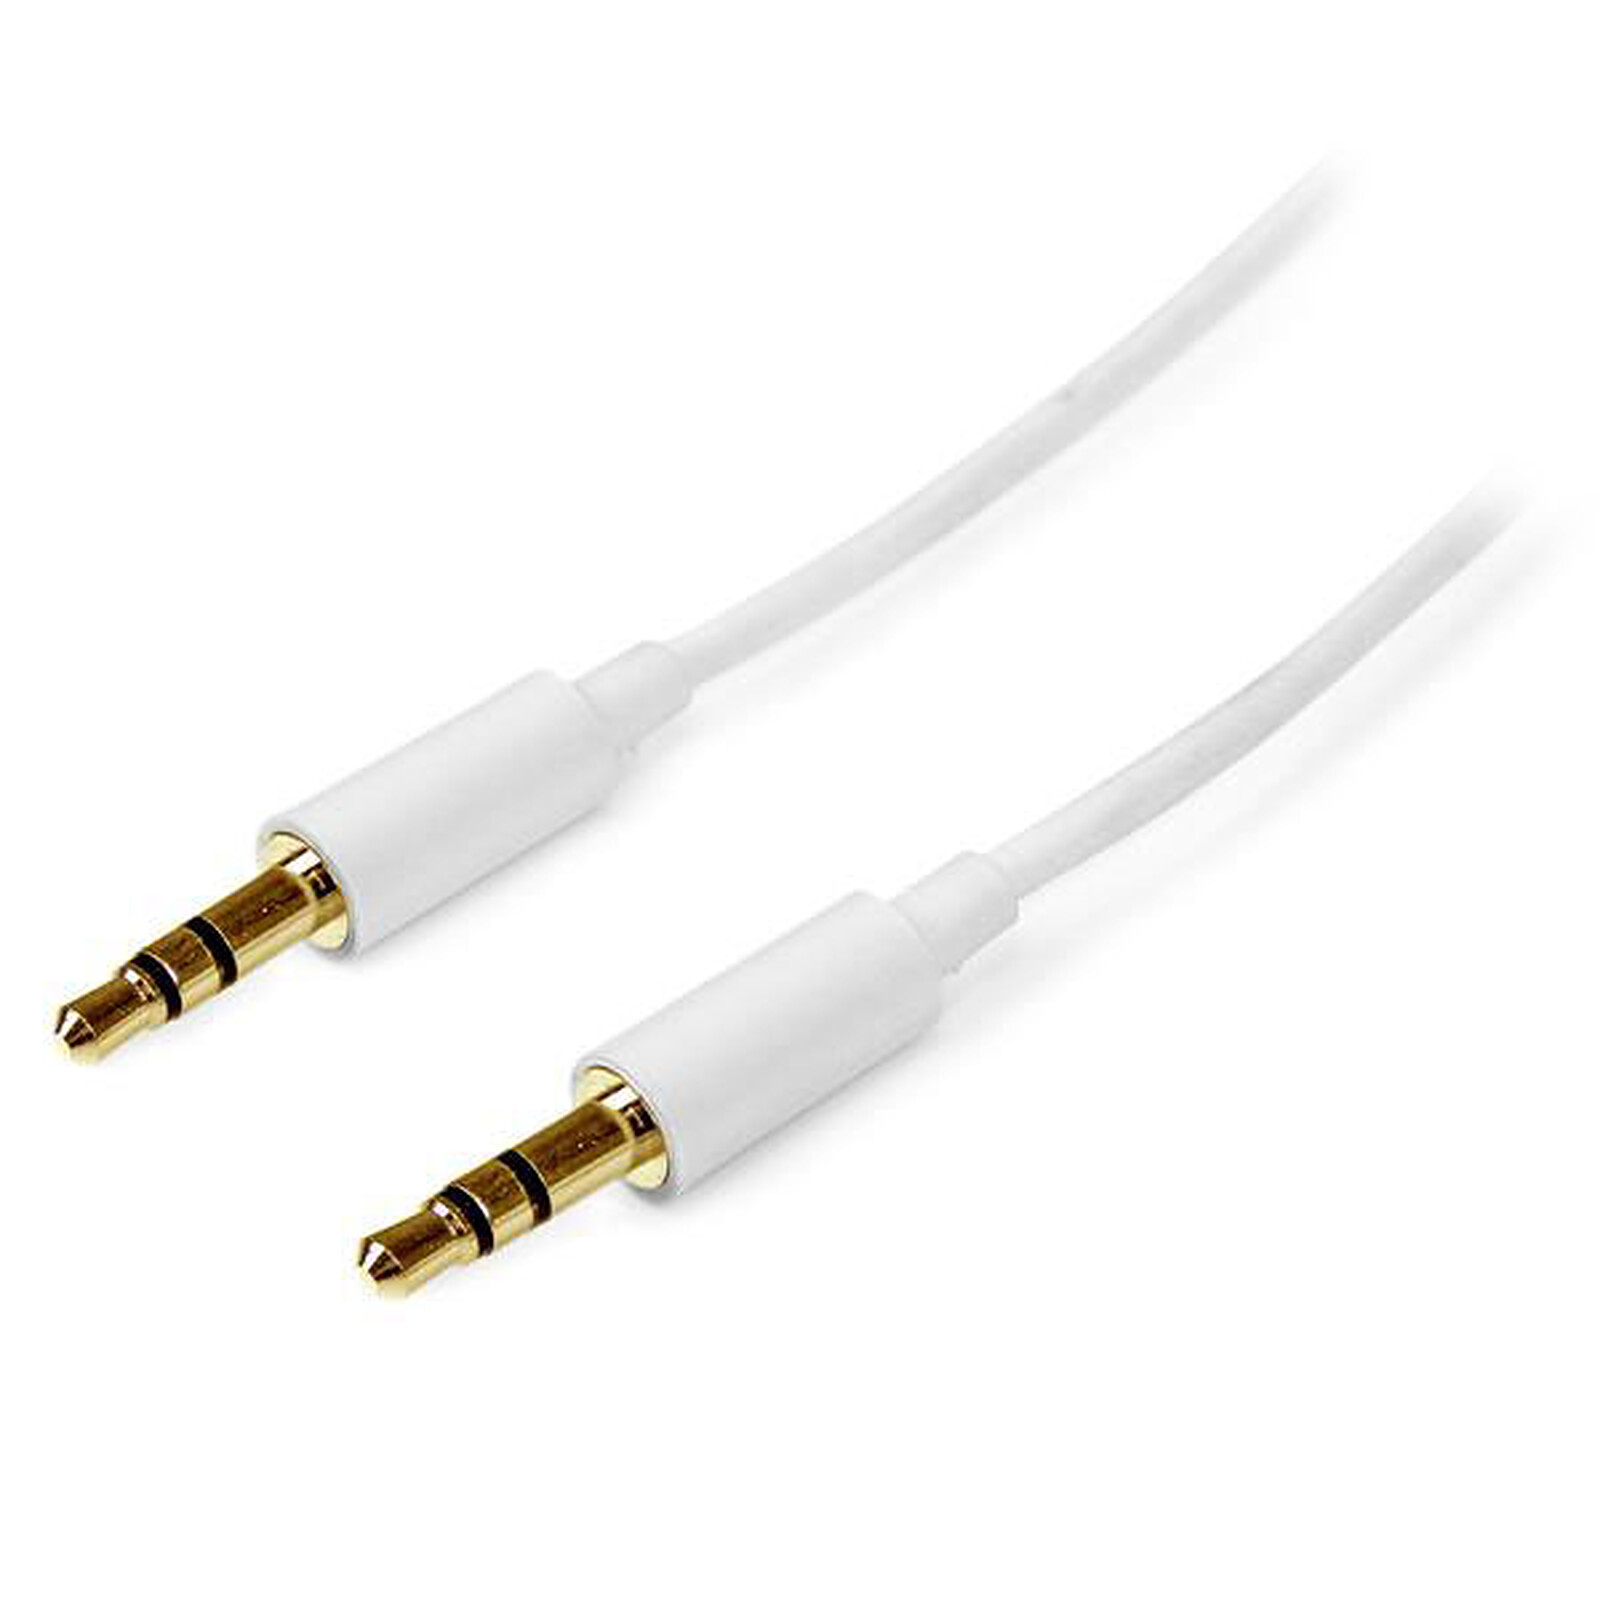 1.5M Headphone Extension Cable Jack 3,5 mm M SODIAL R F Extension Cable for iPod MP3 PC